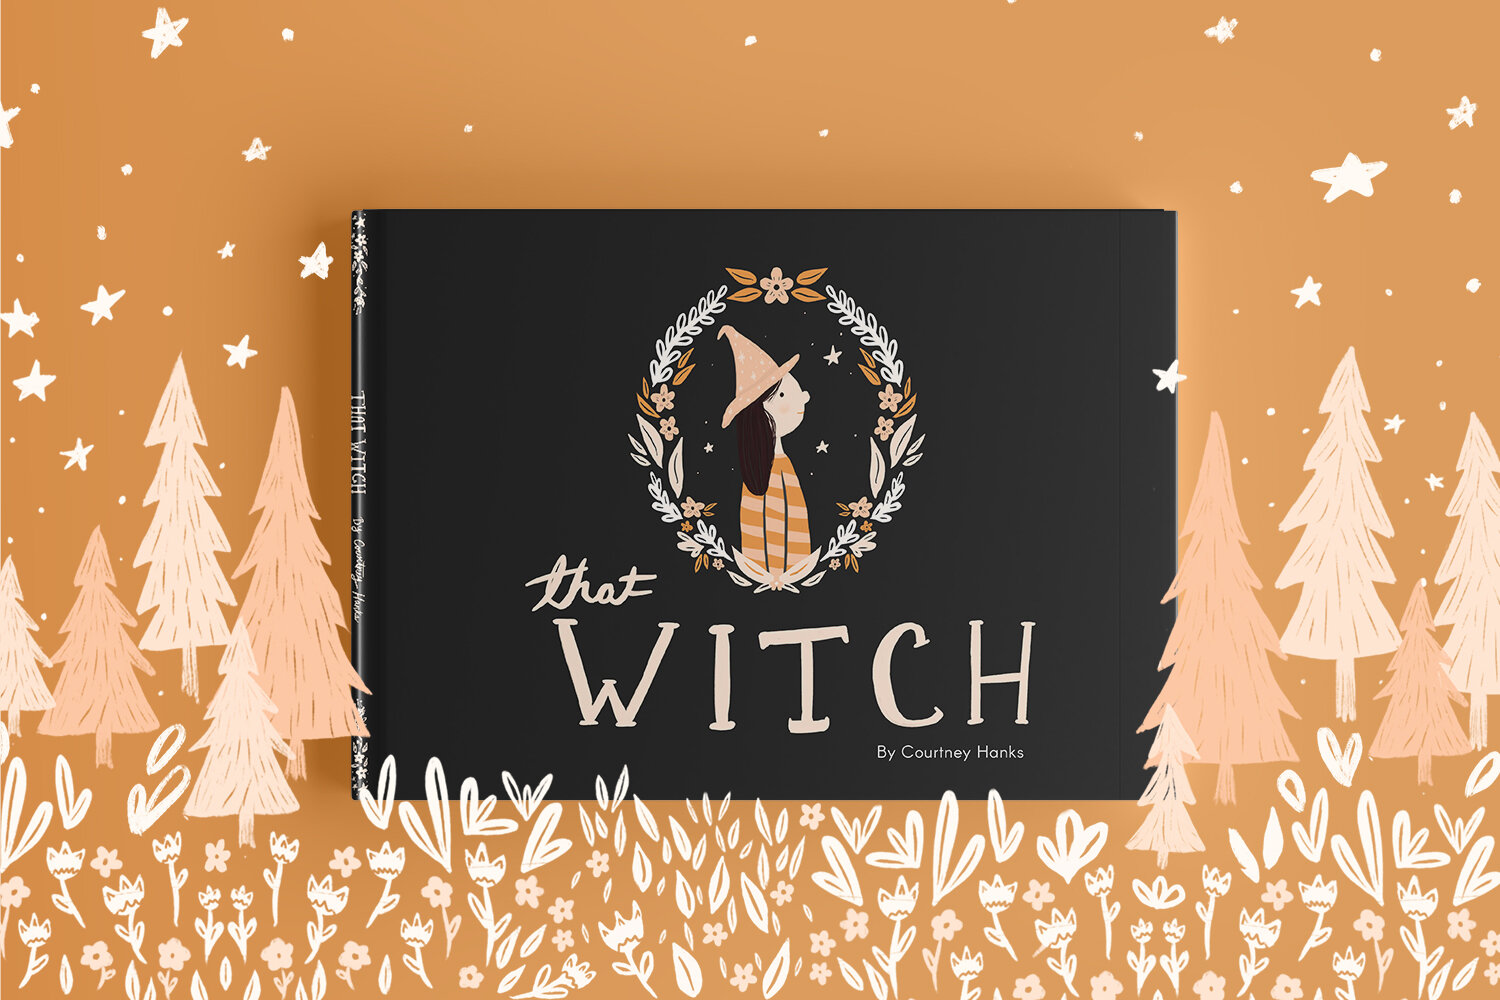 The Witch Halloween Book